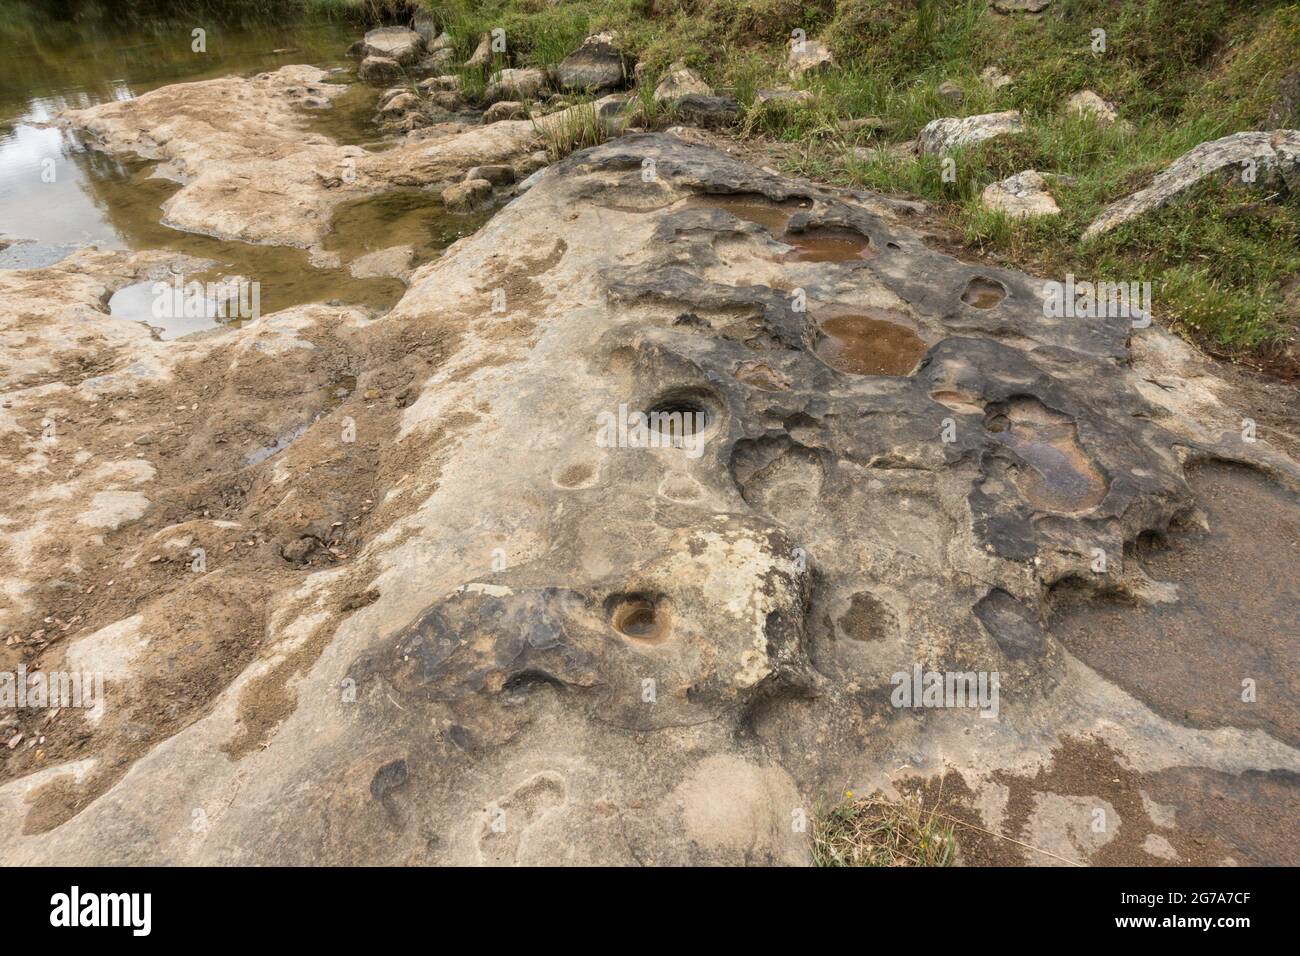 Eroded river bed, forming potholes in limestone rock, Spain, Stock Photo